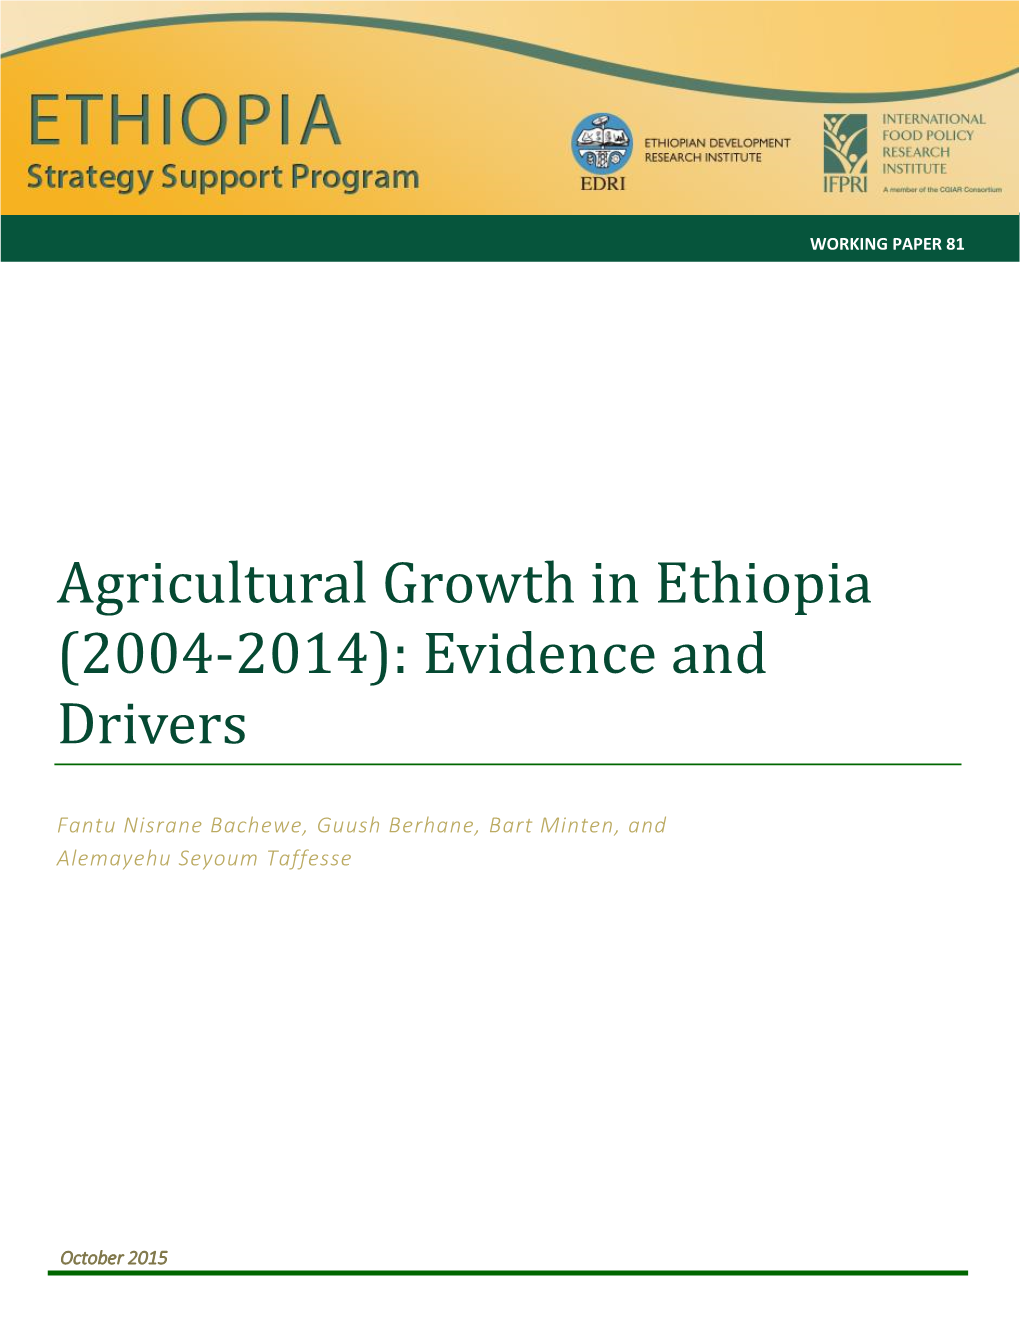 Agricultural Growth in Ethiopia (2004-2014): Evidence and Drivers